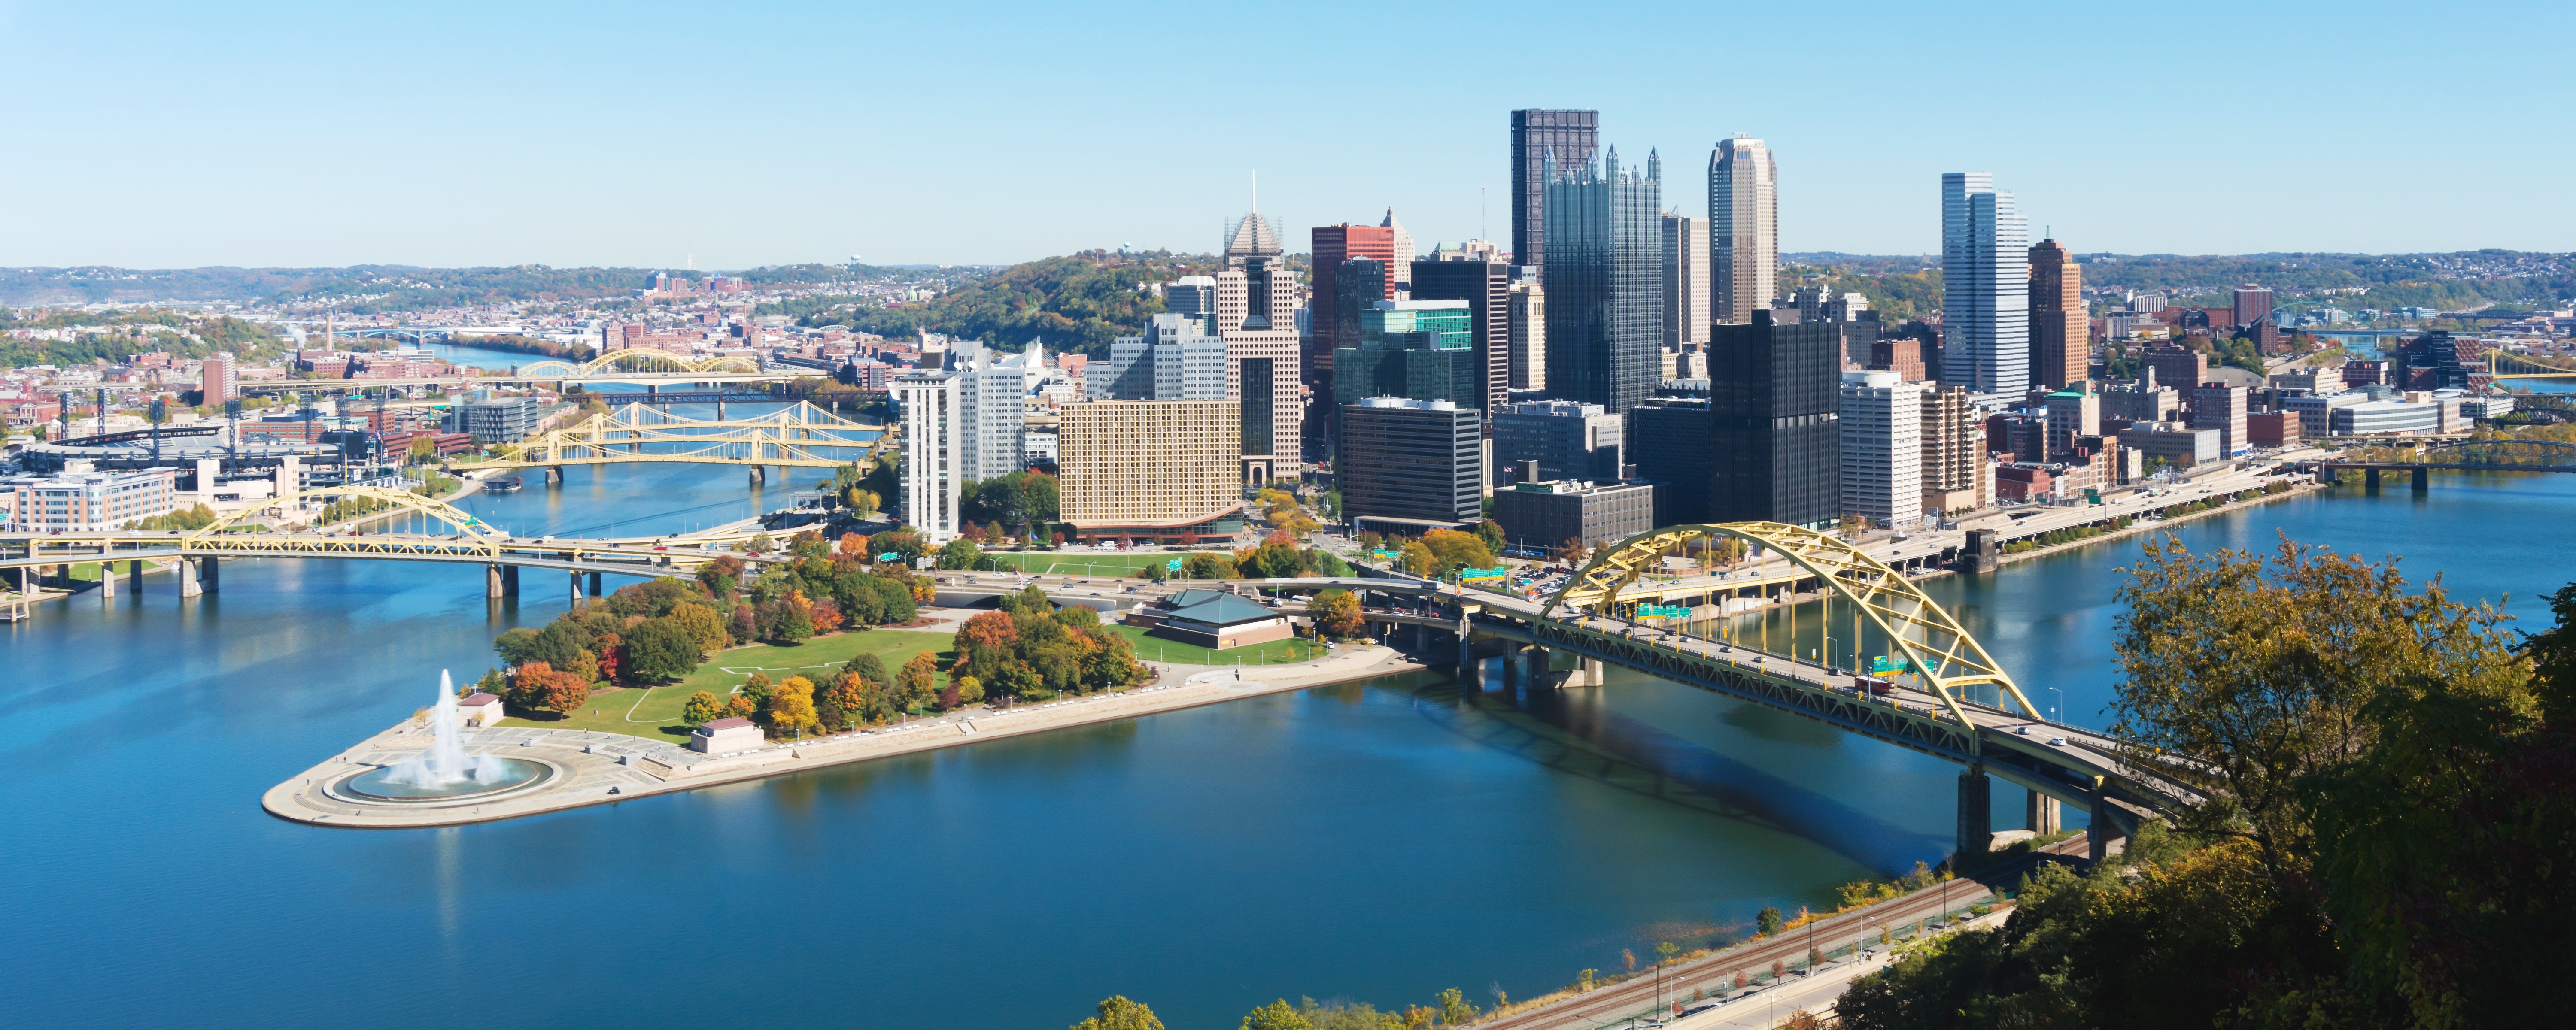 House flipping in Pittsburgh continues throughout its downtown and surrounding areas as new investment opportunities emerge.